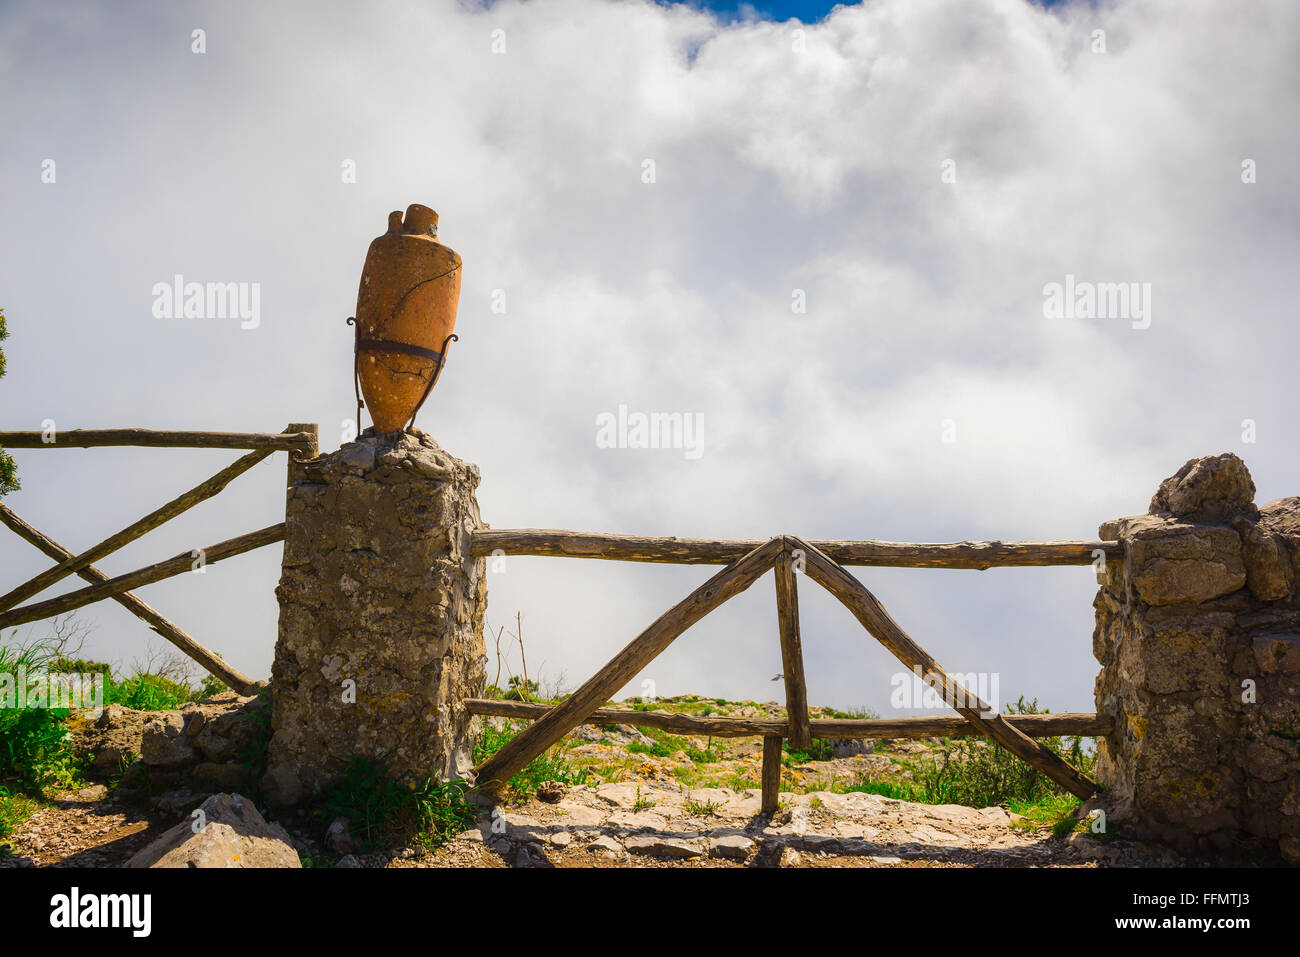 Fence sky clouds, view of a fence at Monte Solaro offering protection from the sheer drop of the cliff beyond it, Capri island, Campania, italy. Stock Photo